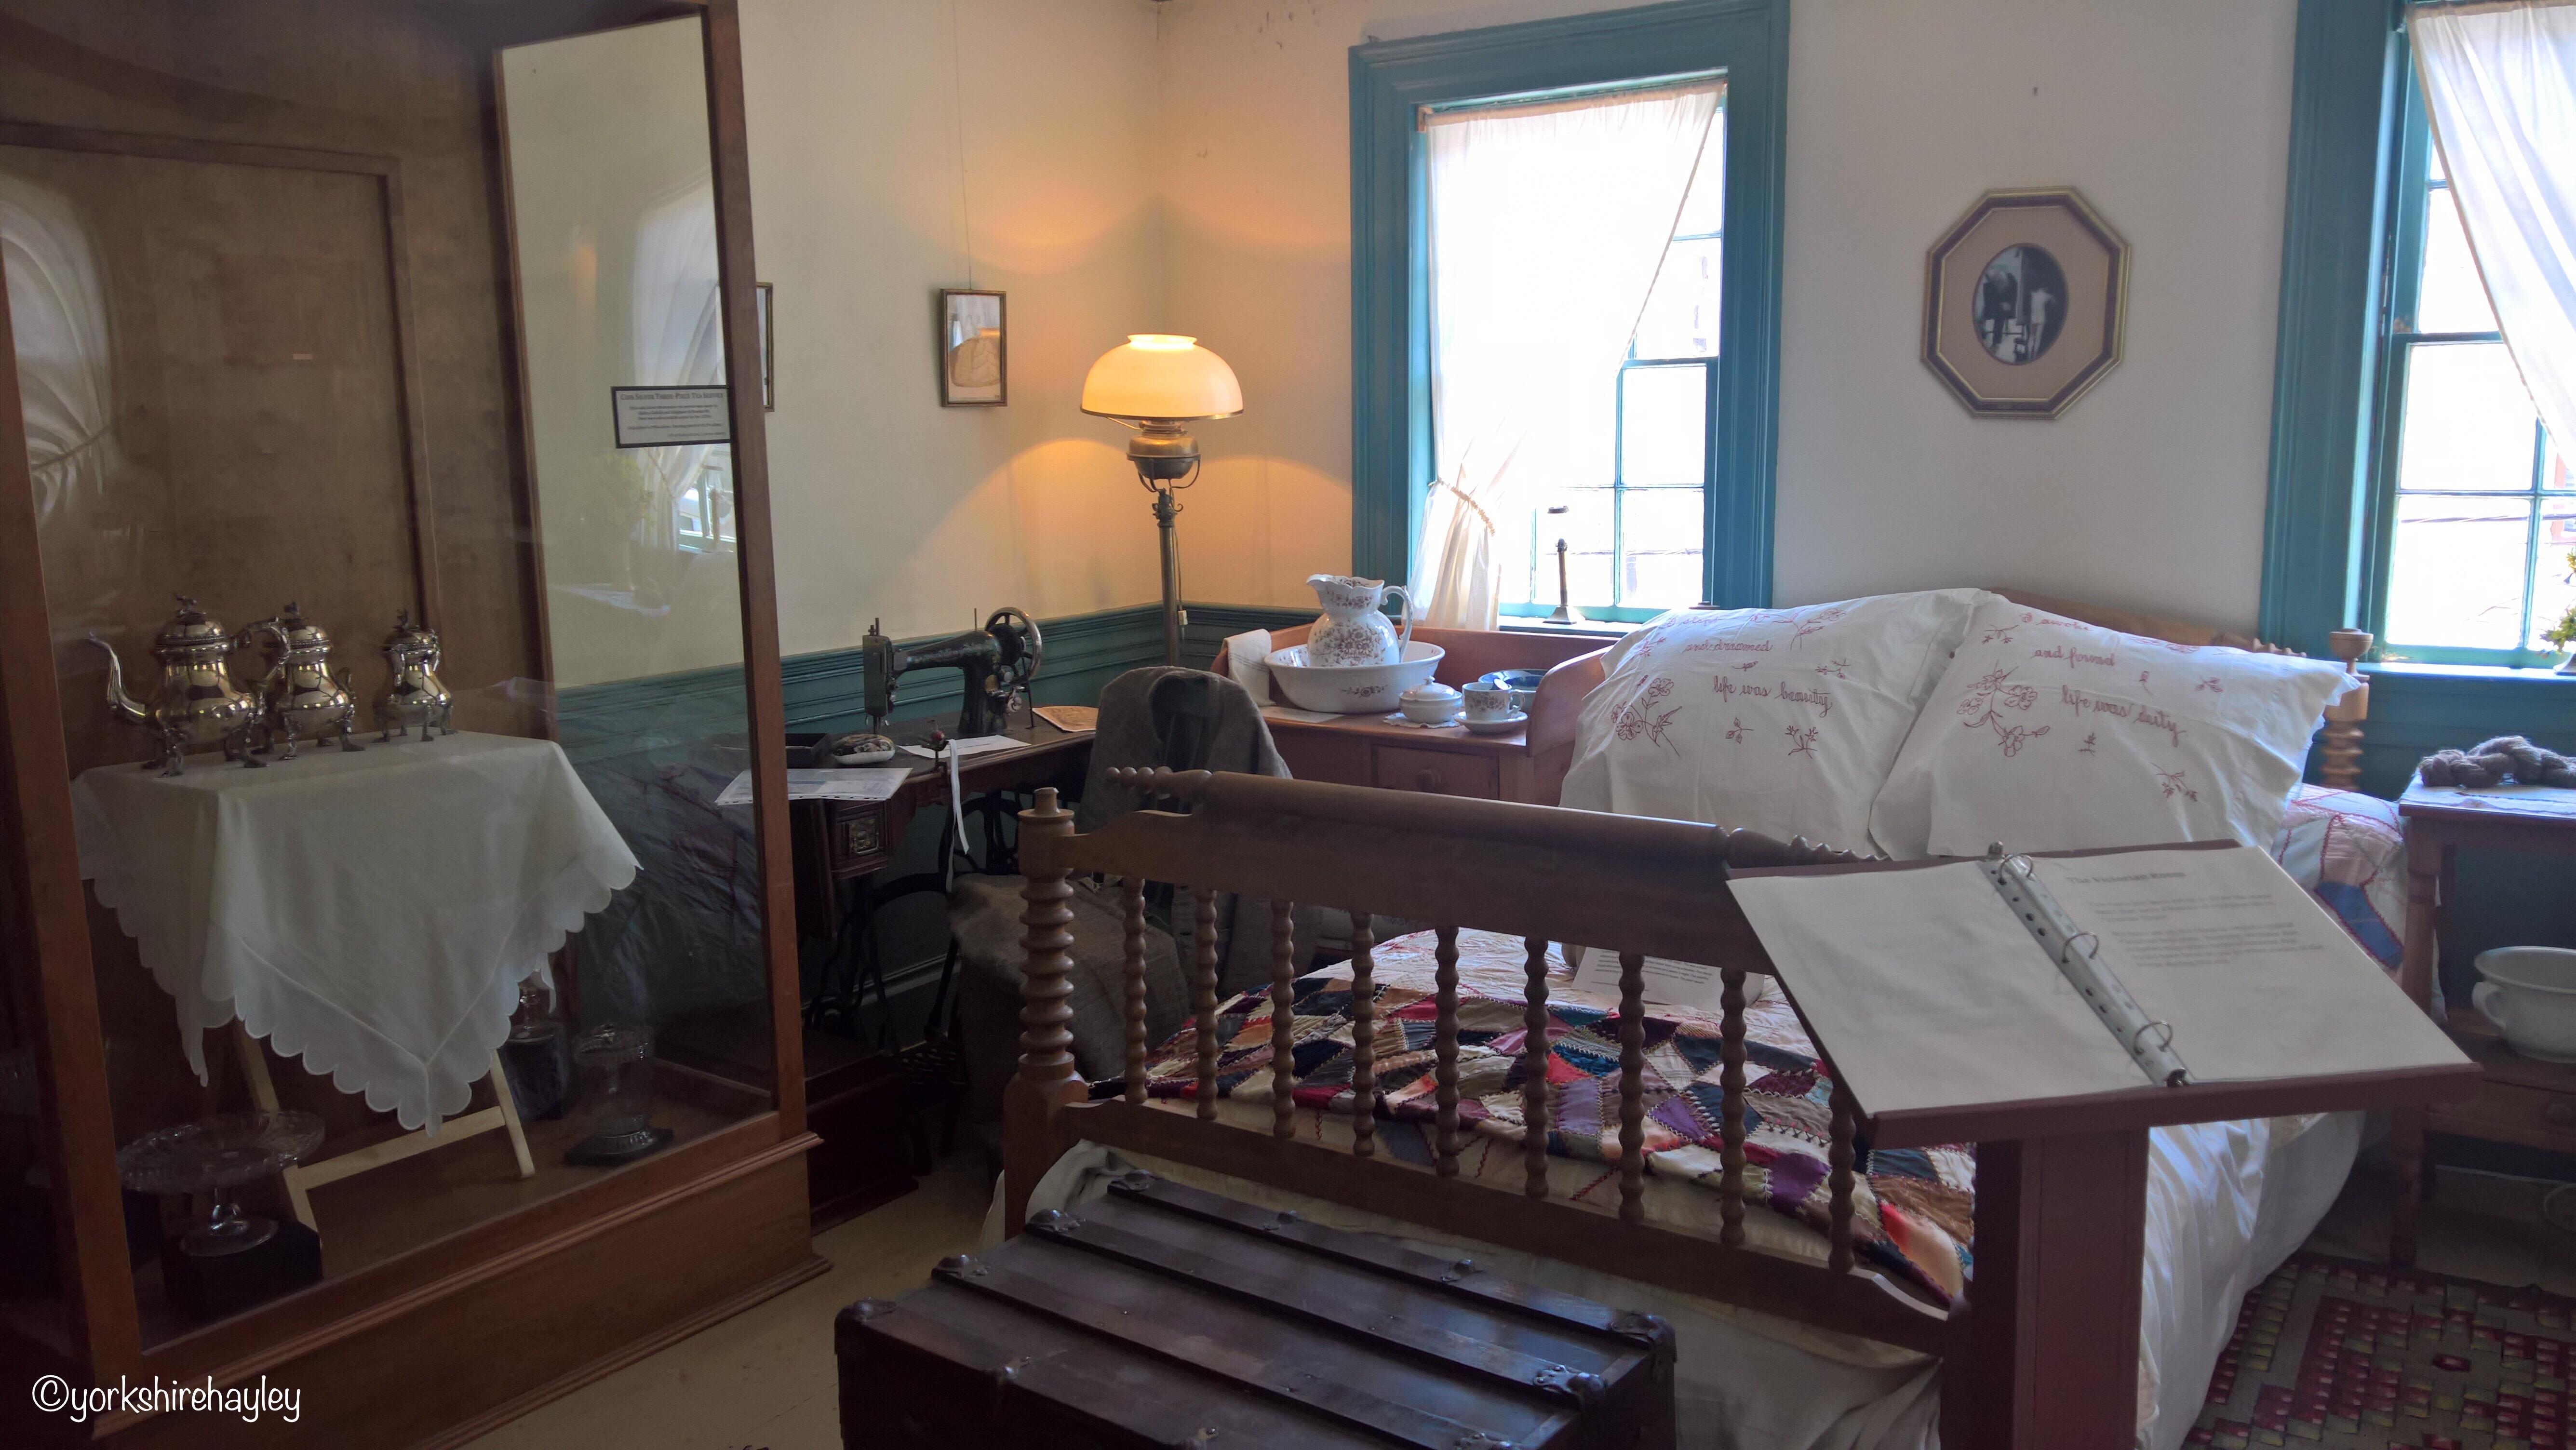 Bedroom in the historic Knaut Rhuland House Museum